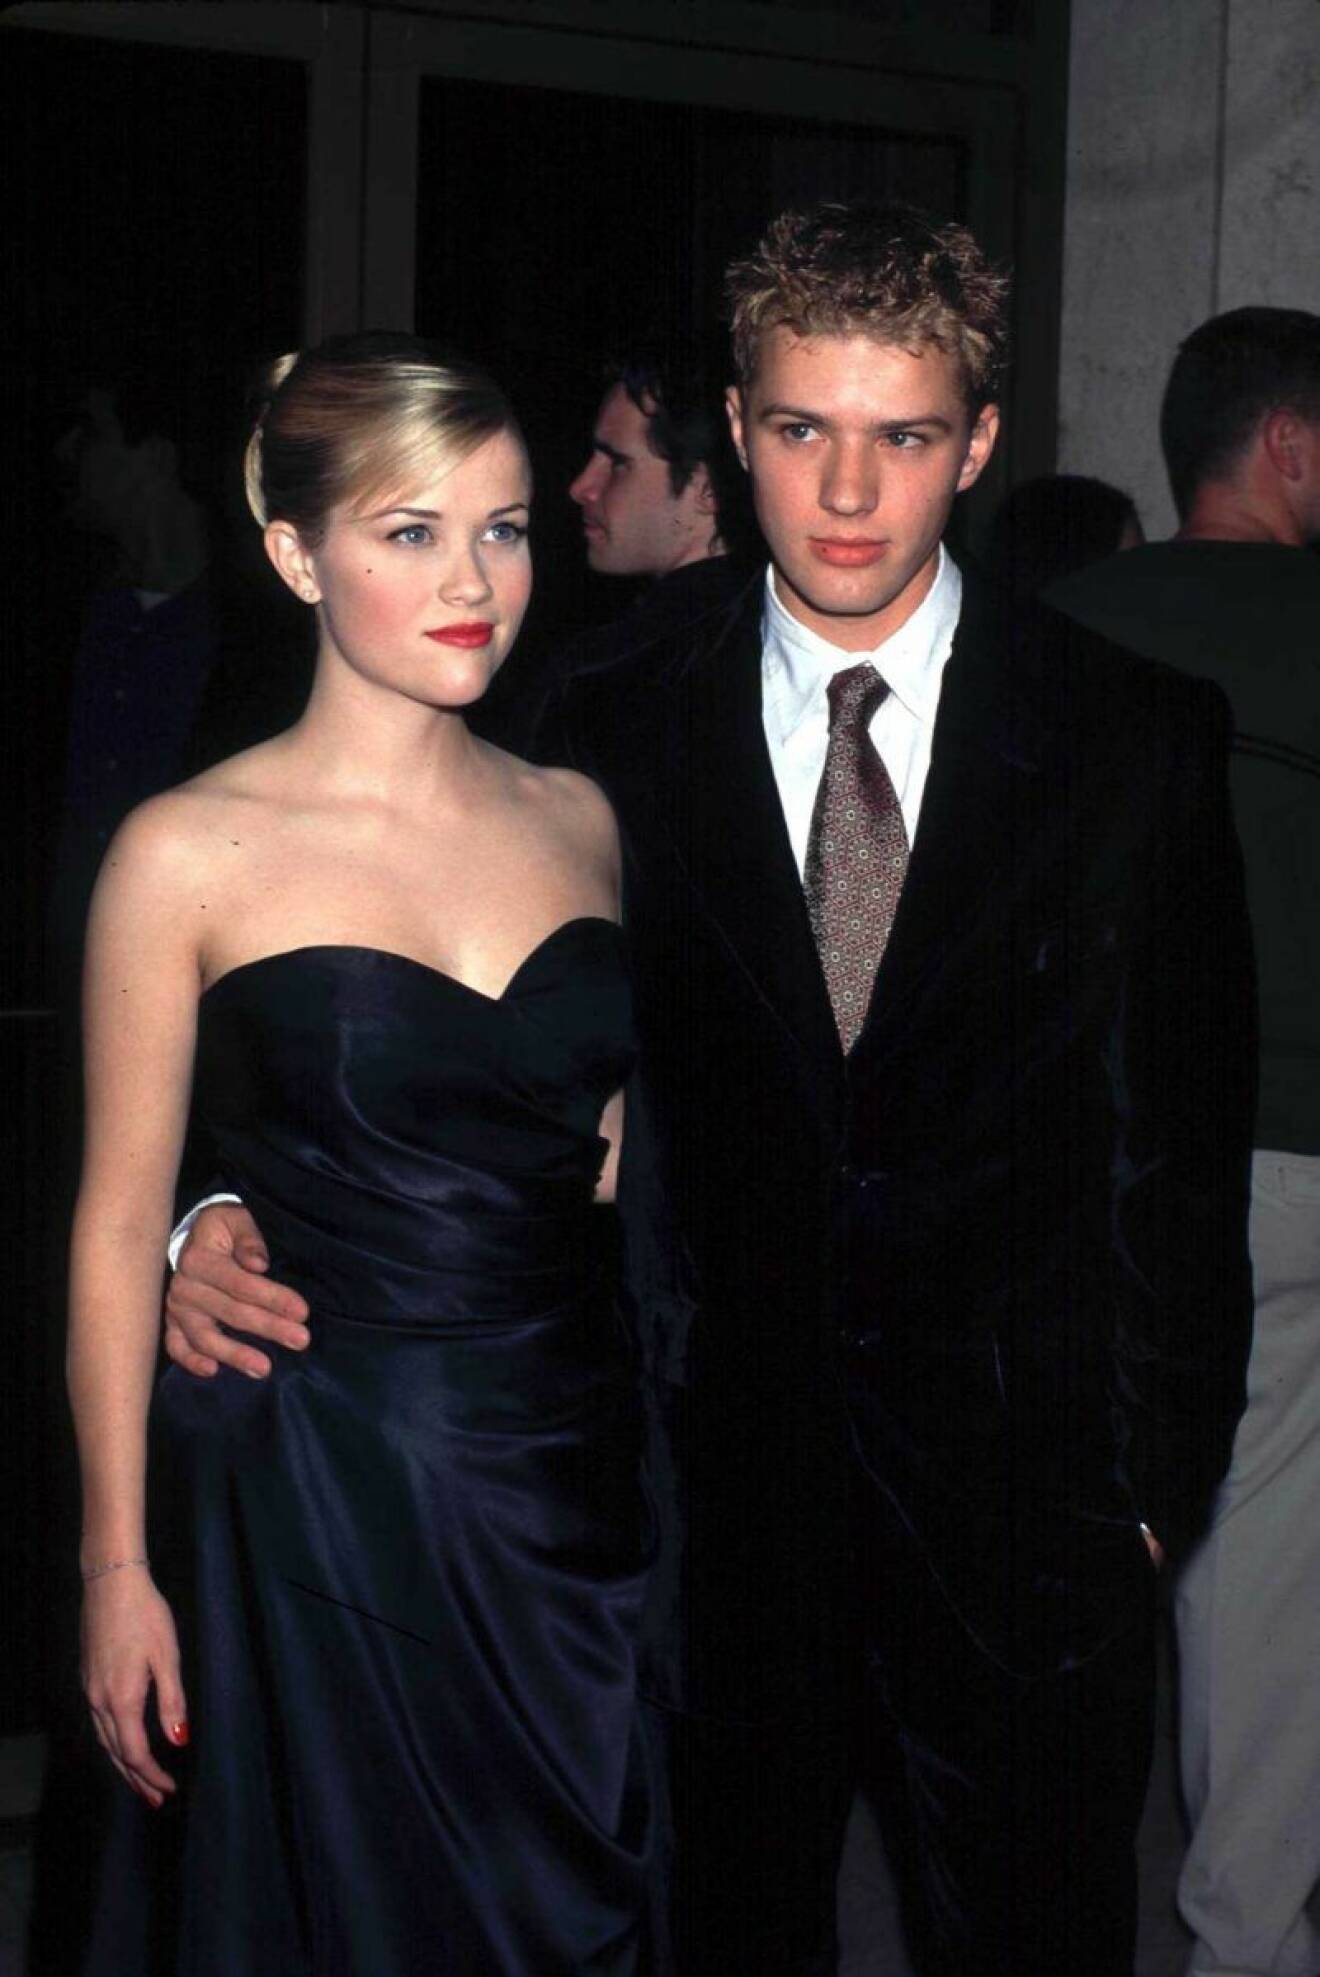 Reese Witherspoon och Ryan Phillippe